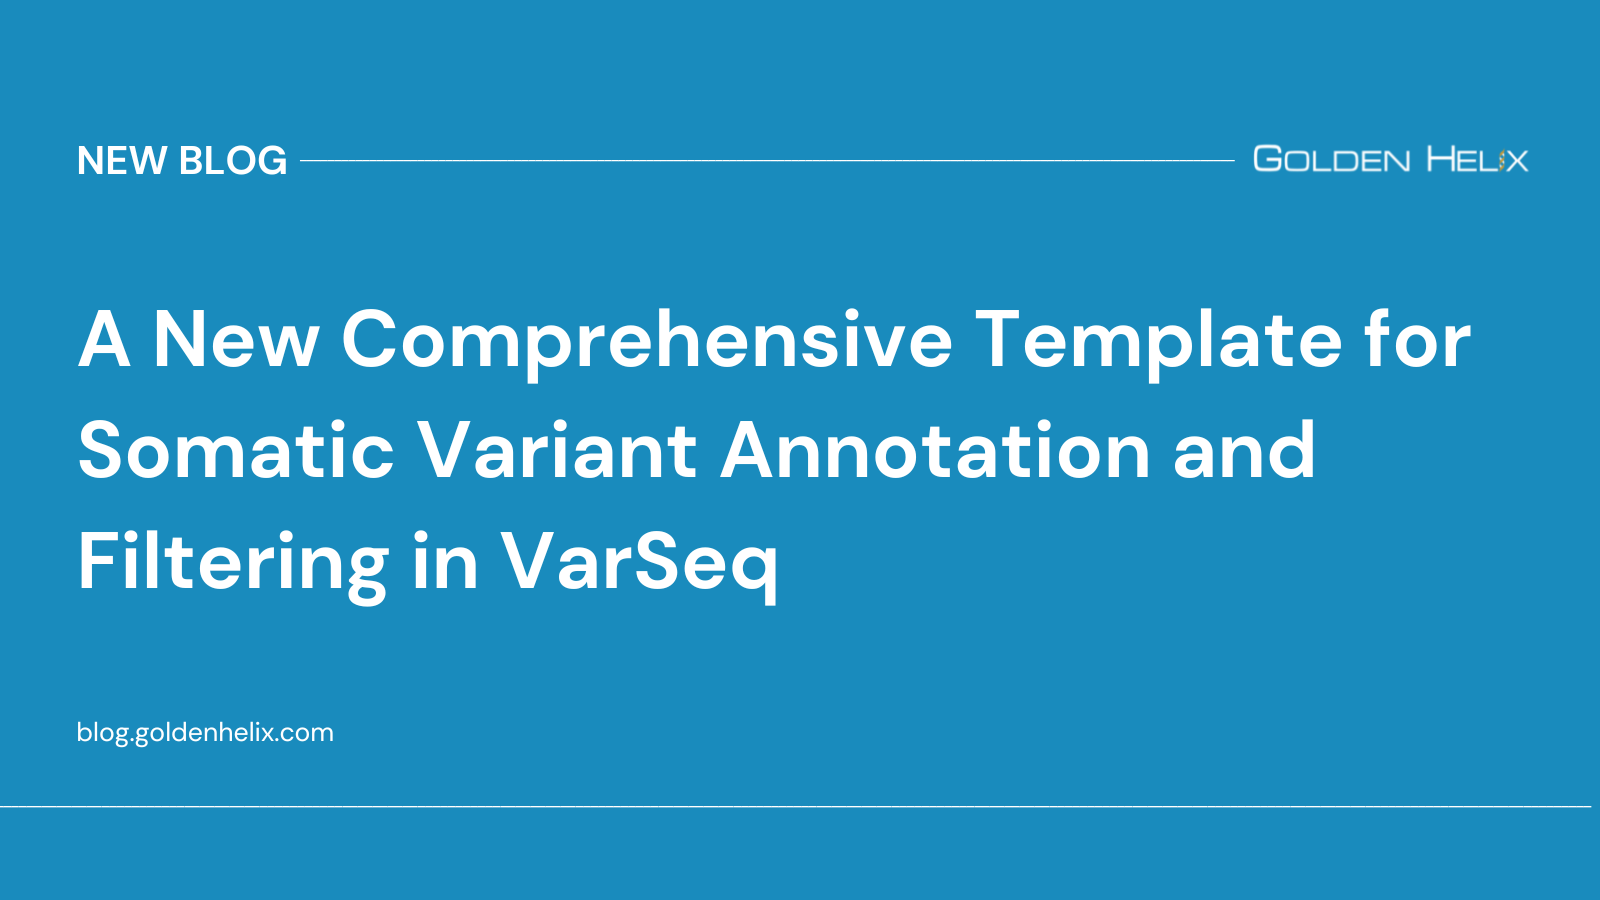 A New Comprehensive Template for Somatic Variant Annotation and Filtering in VarSeq